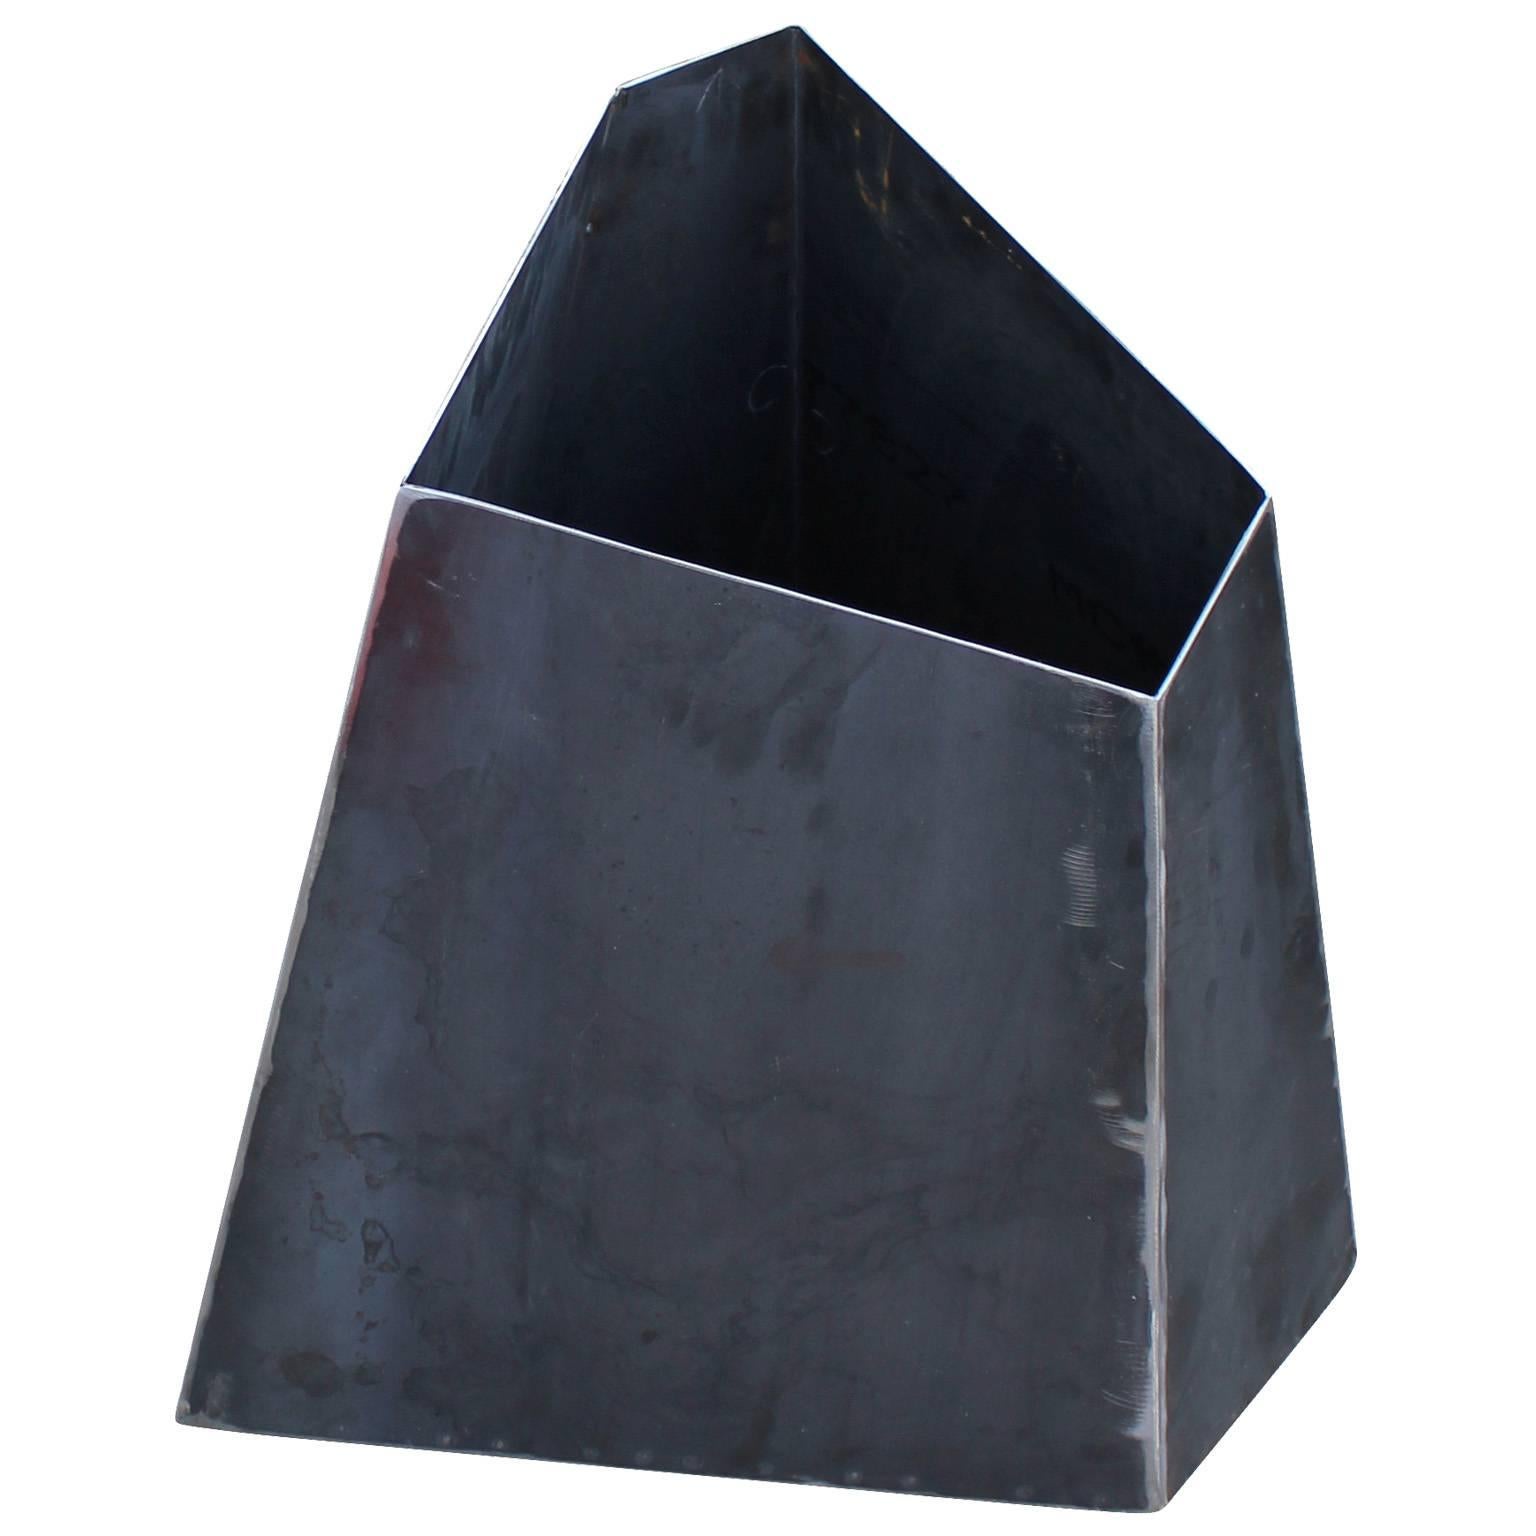 Custom-made Corten steel planter. This type of steel will get a perfect rust patina but will not rot. Geometric shape looks incredible from all angles. Inquire for custom sizes and powder coat finishes.